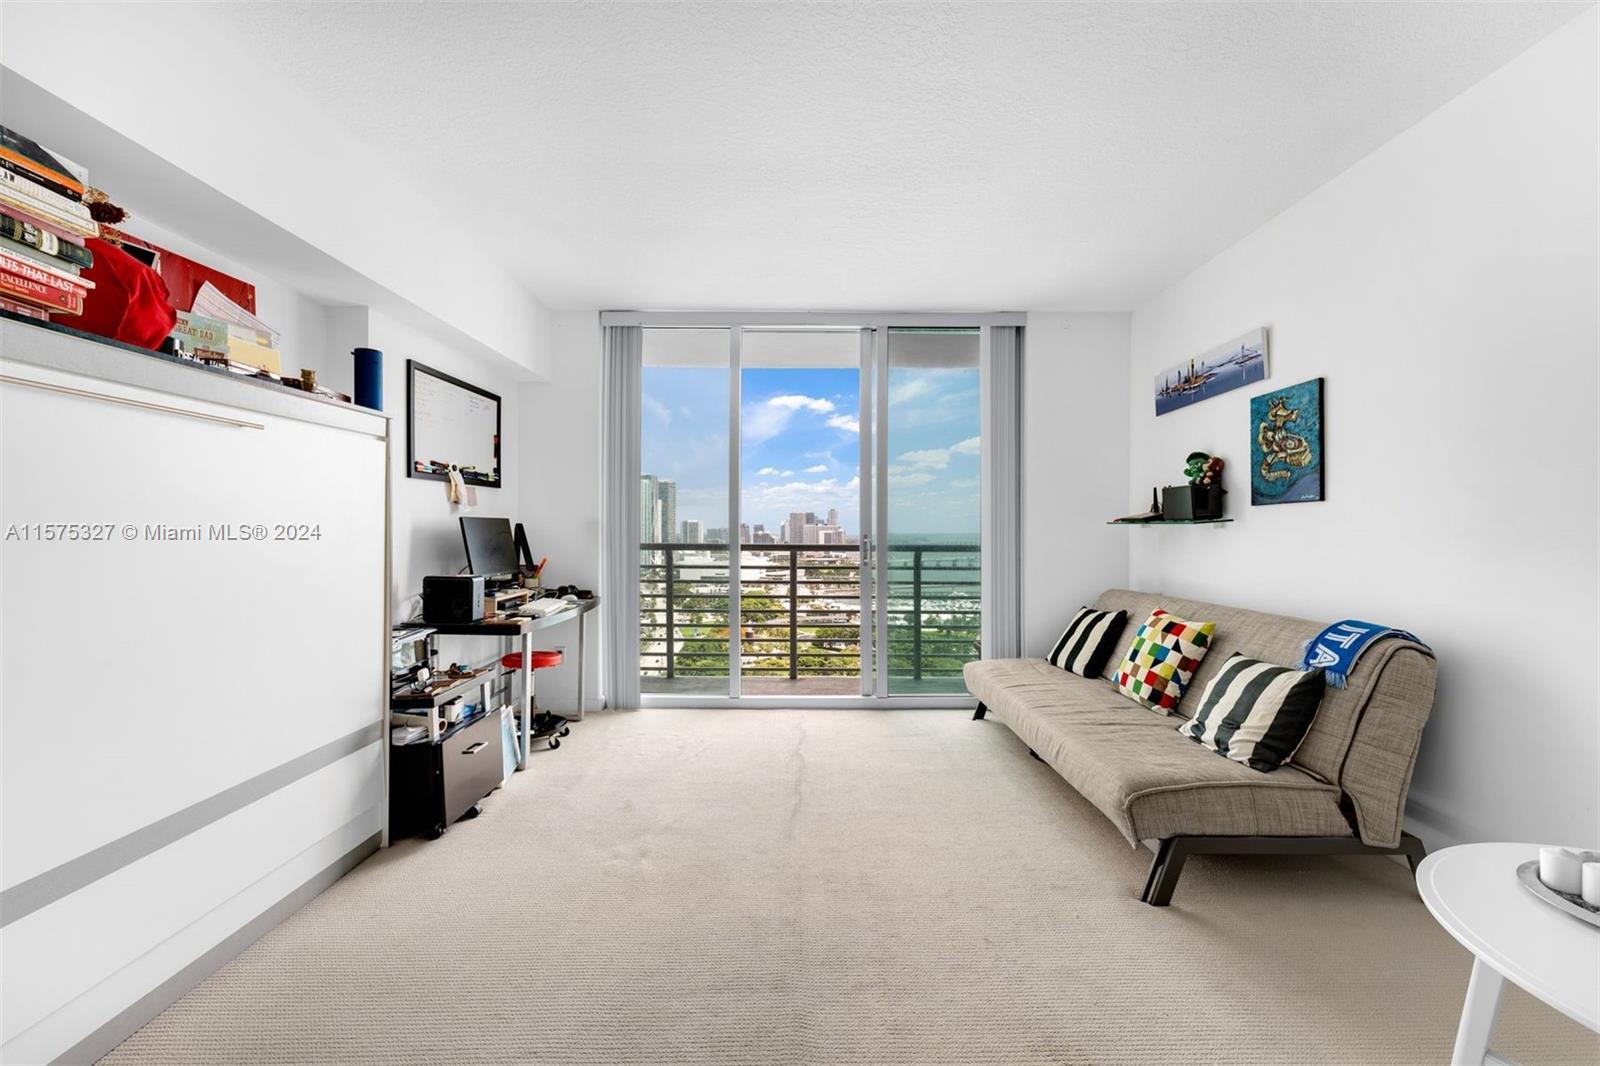 A beautiful studio at One Miami West with 507 interior square feet, a balcony, granite countertops, 